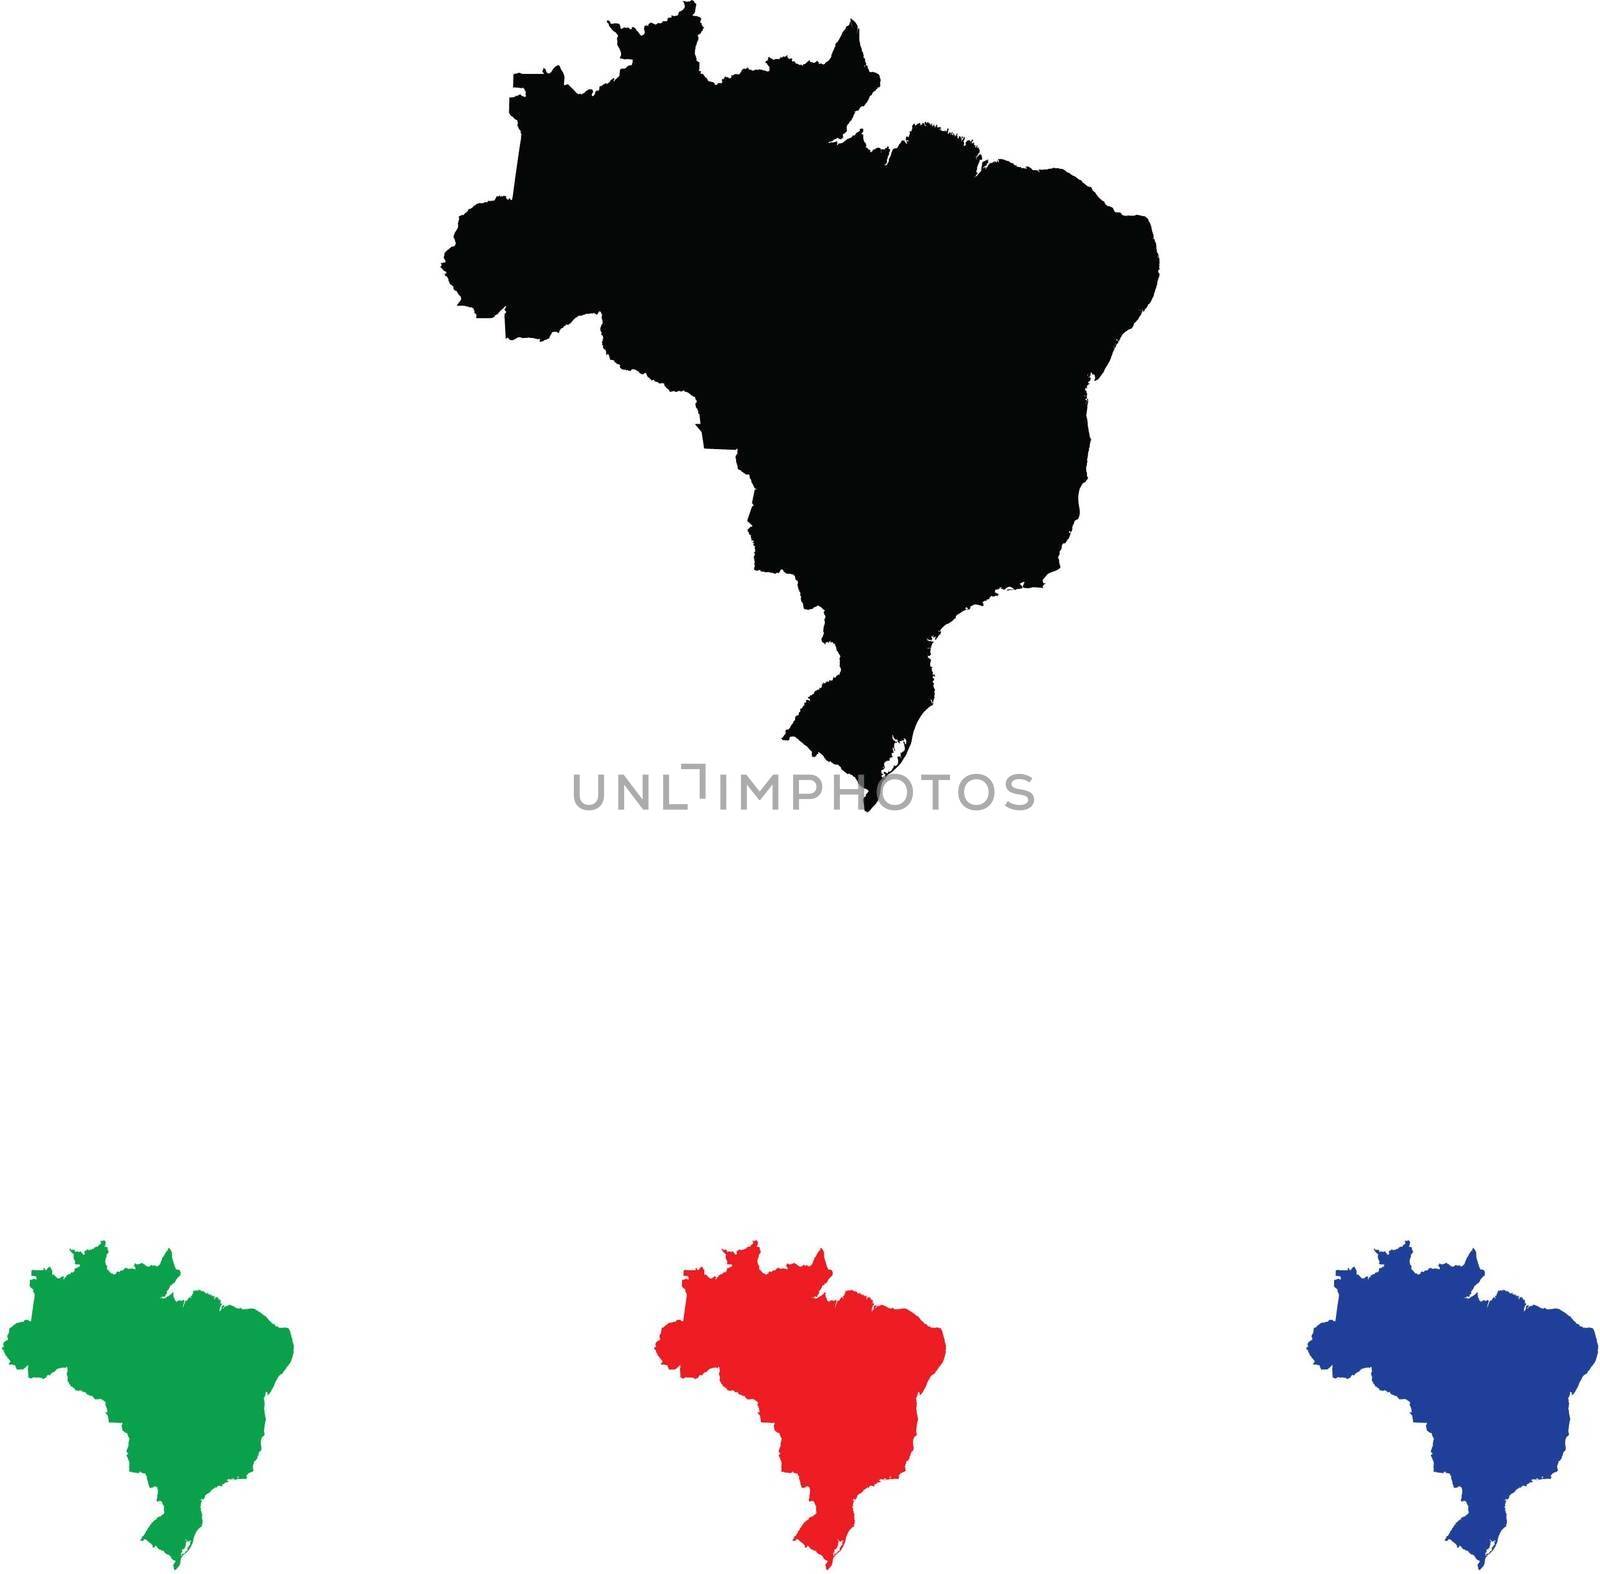 Brazil Icon Illustration with Four Color Variations